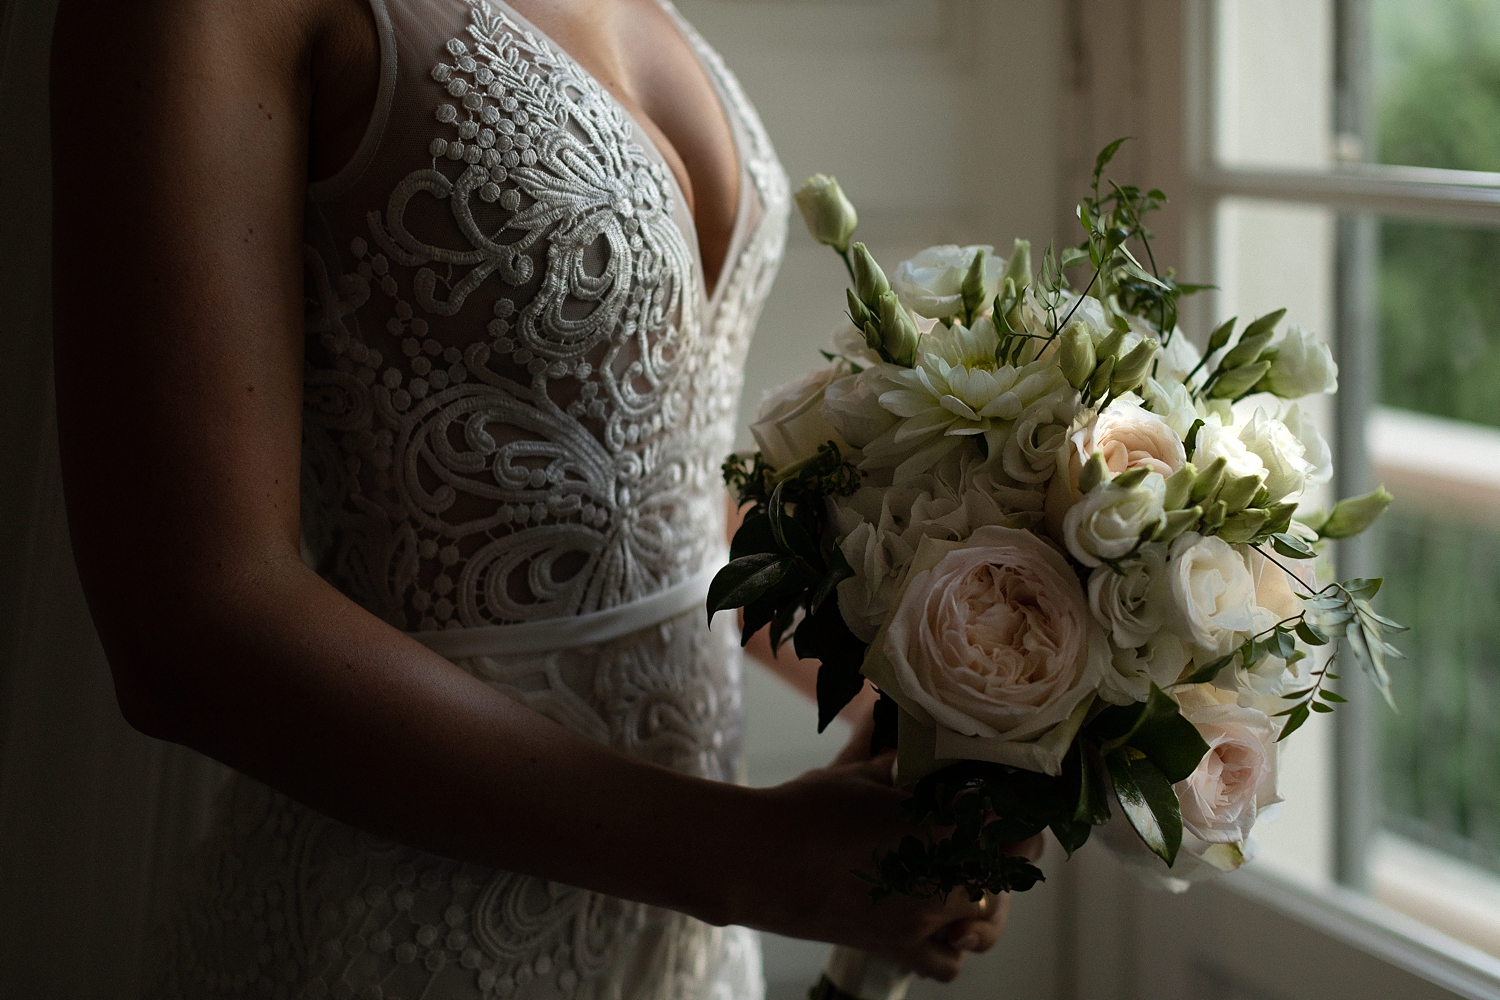 Bride holding floral bouquet in white lace wedding dress by window